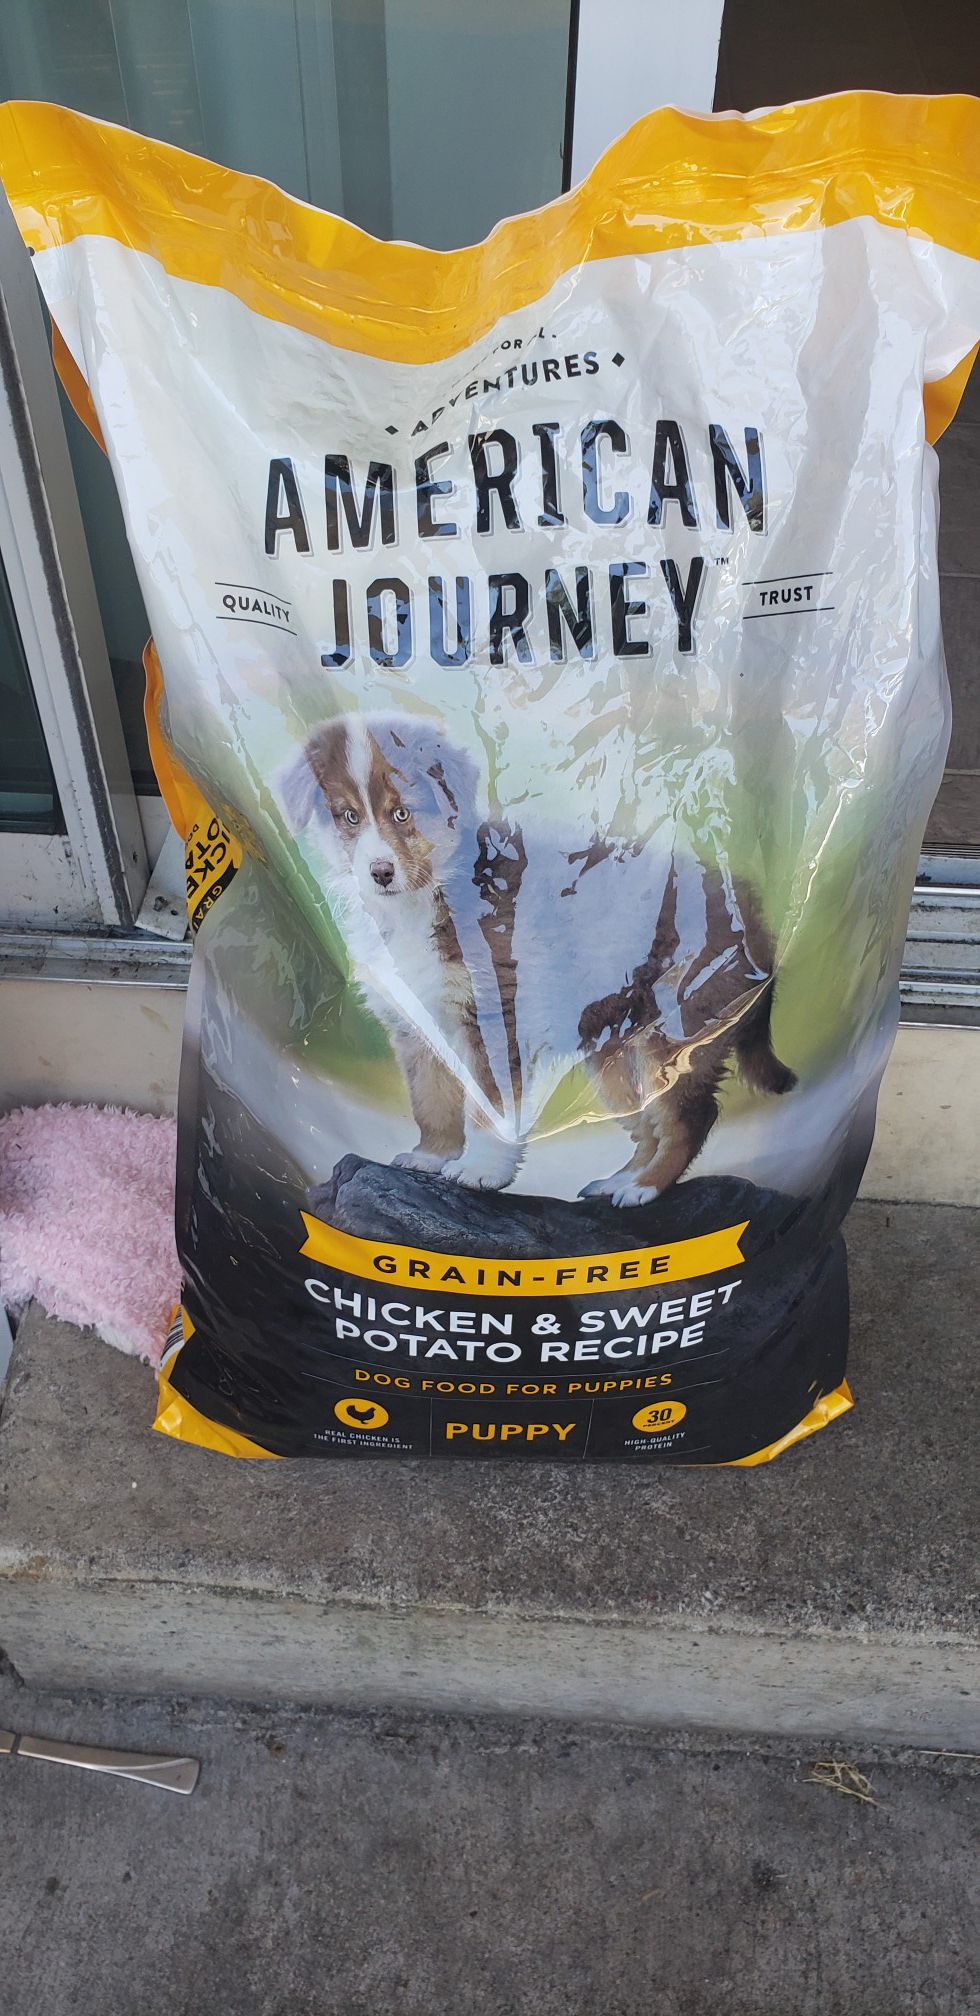 American Journey puppy food